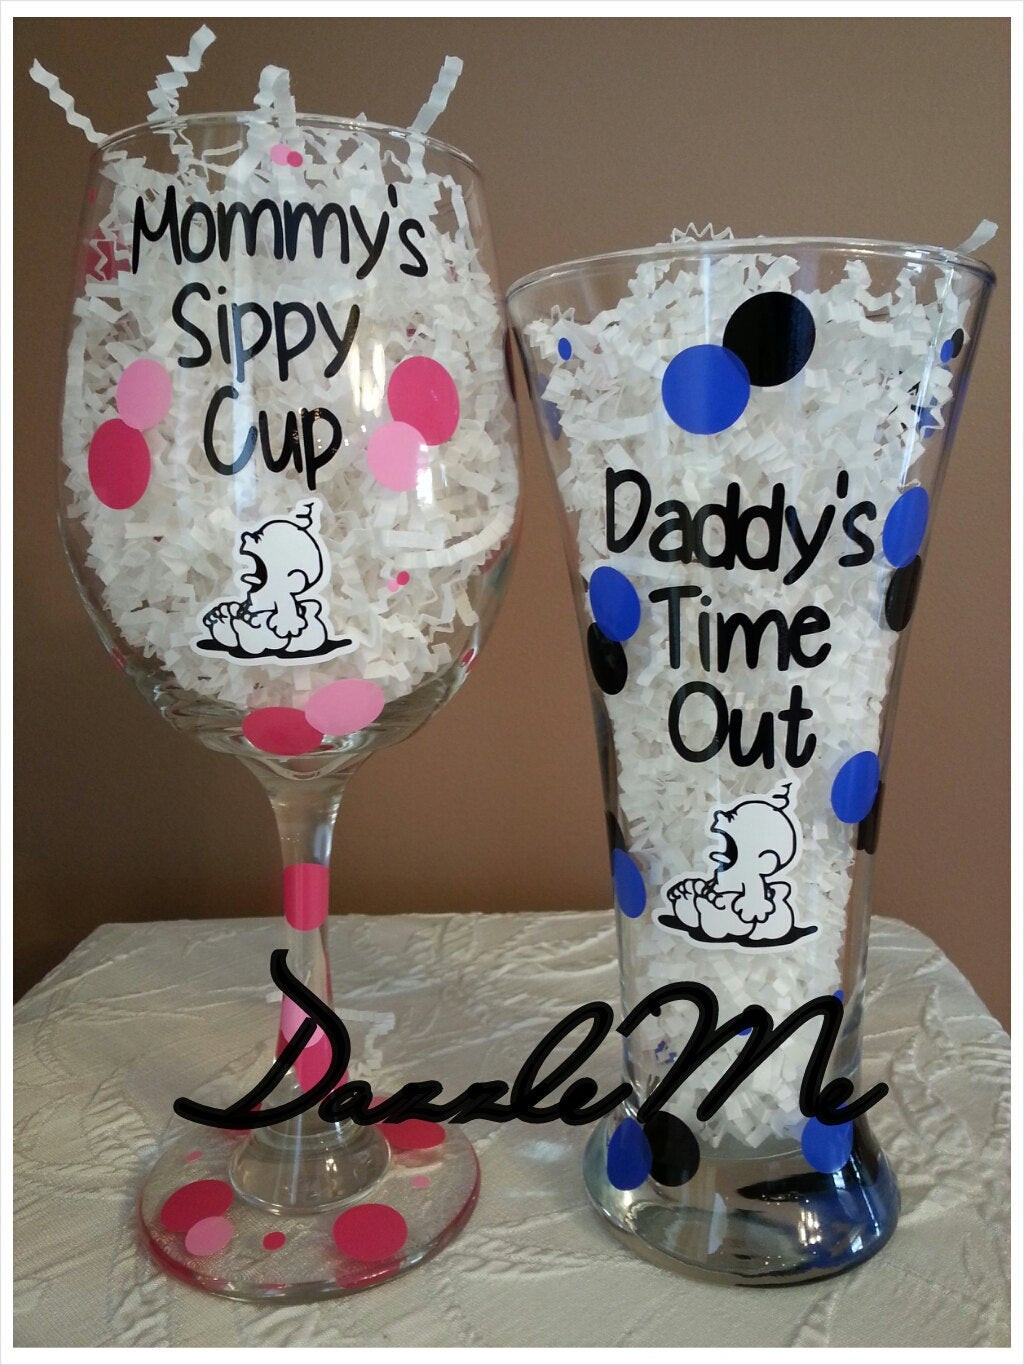 Gift Ideas For Mom To Be At Baby Shower
 Cute Baby Shower Gift Mommys Sippy Cup & by DazzleMeByCamelle